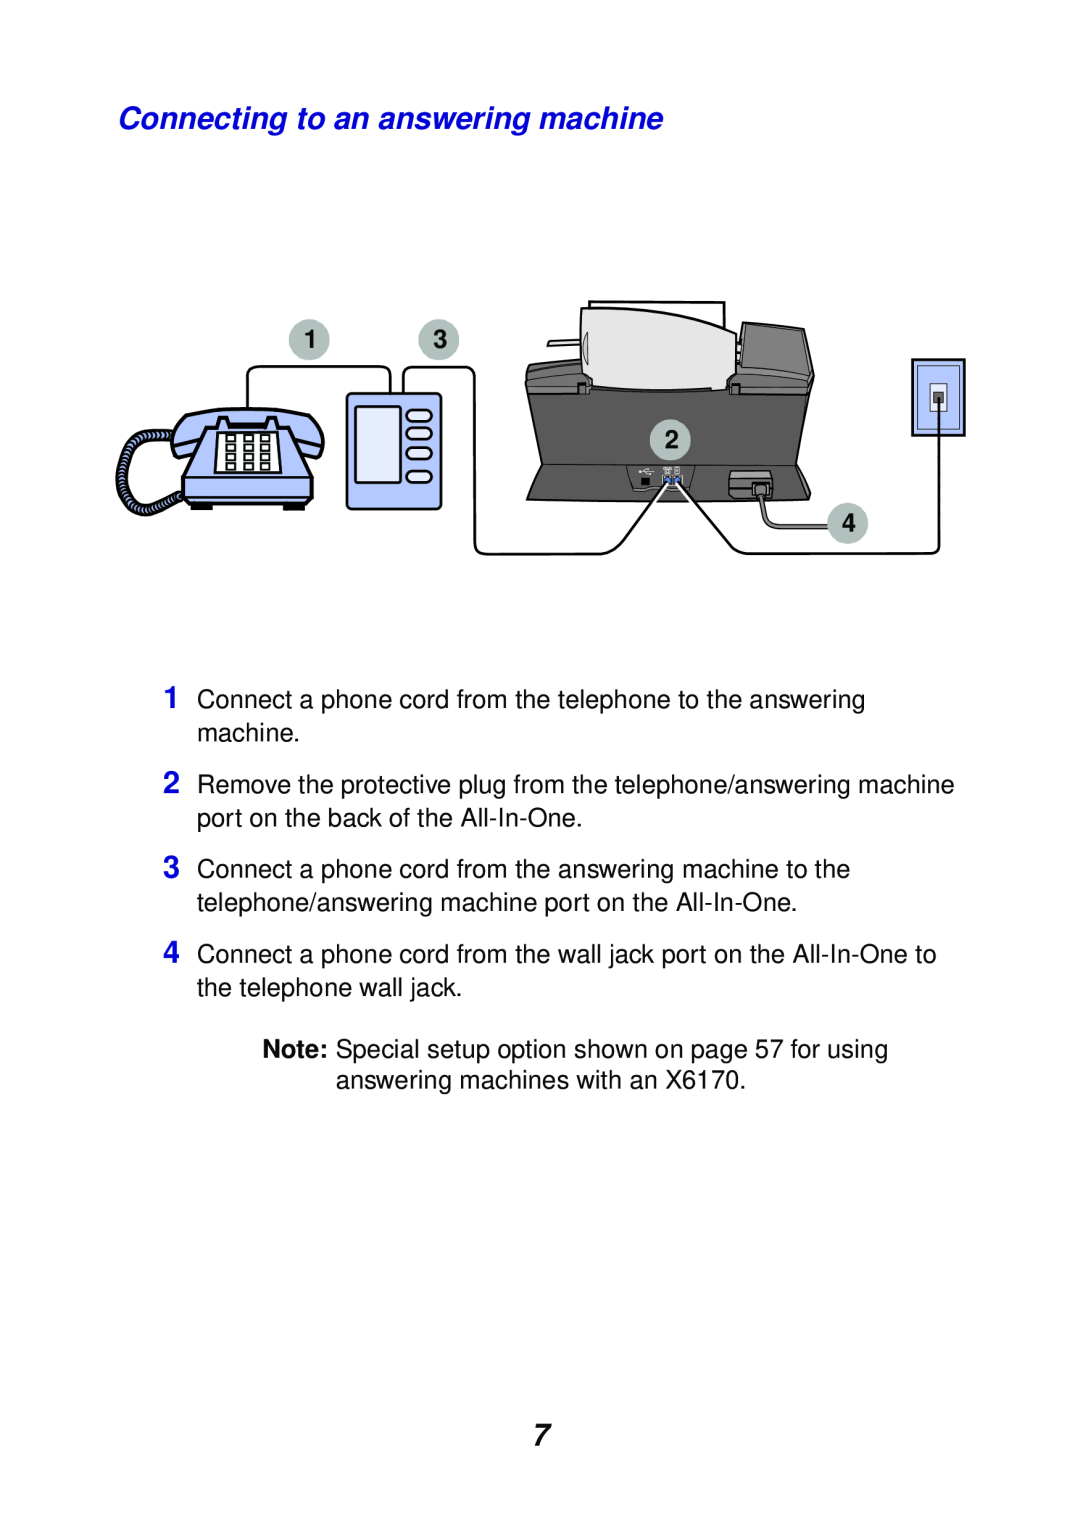 Lexmark X6100 manual Connecting to an answering machine, 13 2 4 